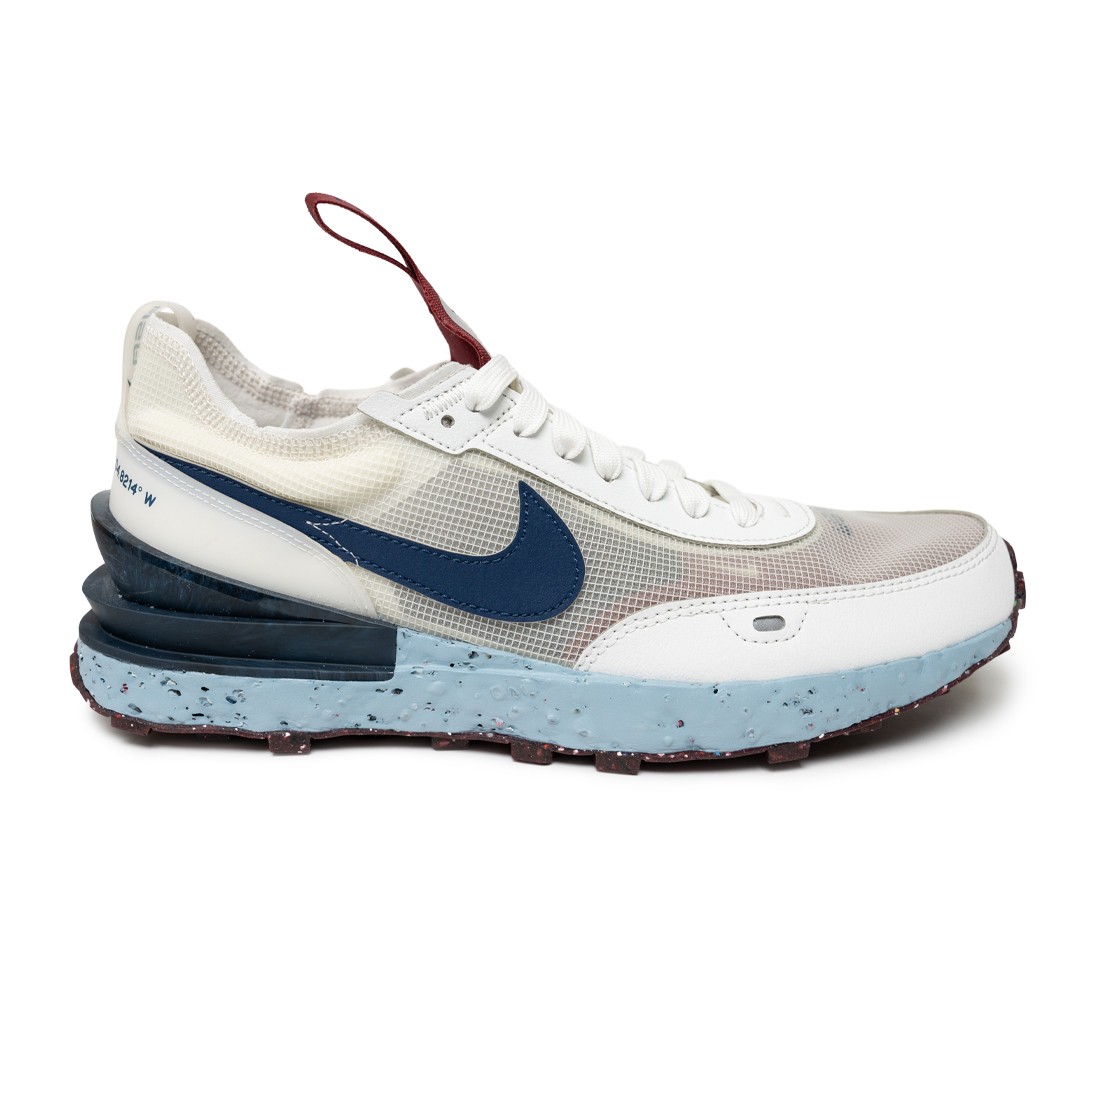 Nike the nike waffle one Men Waffle One Crater (summit white / blue void-team red)